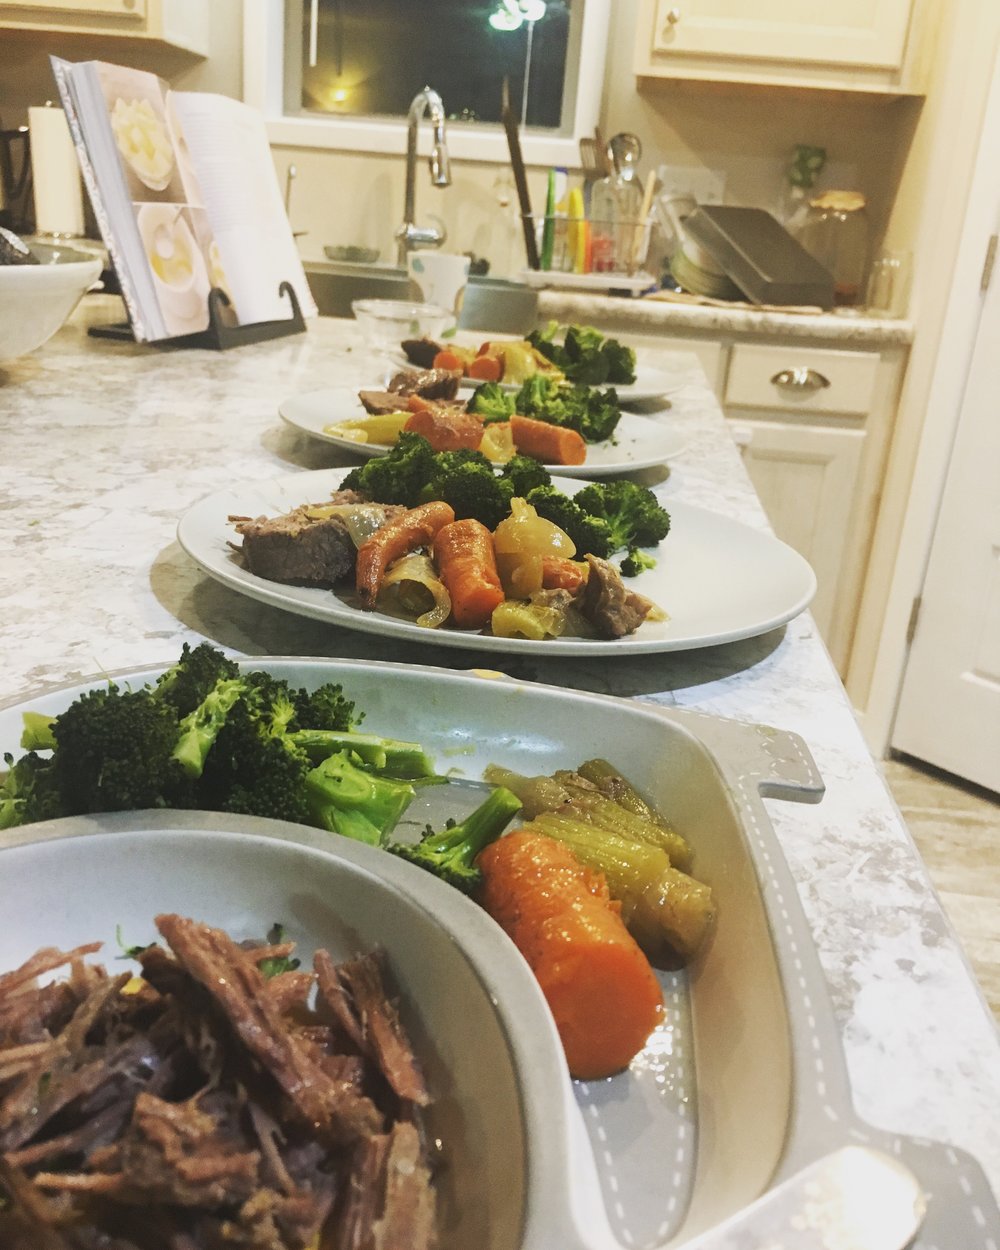 Crock pot beef w/ veggies for the whole fam